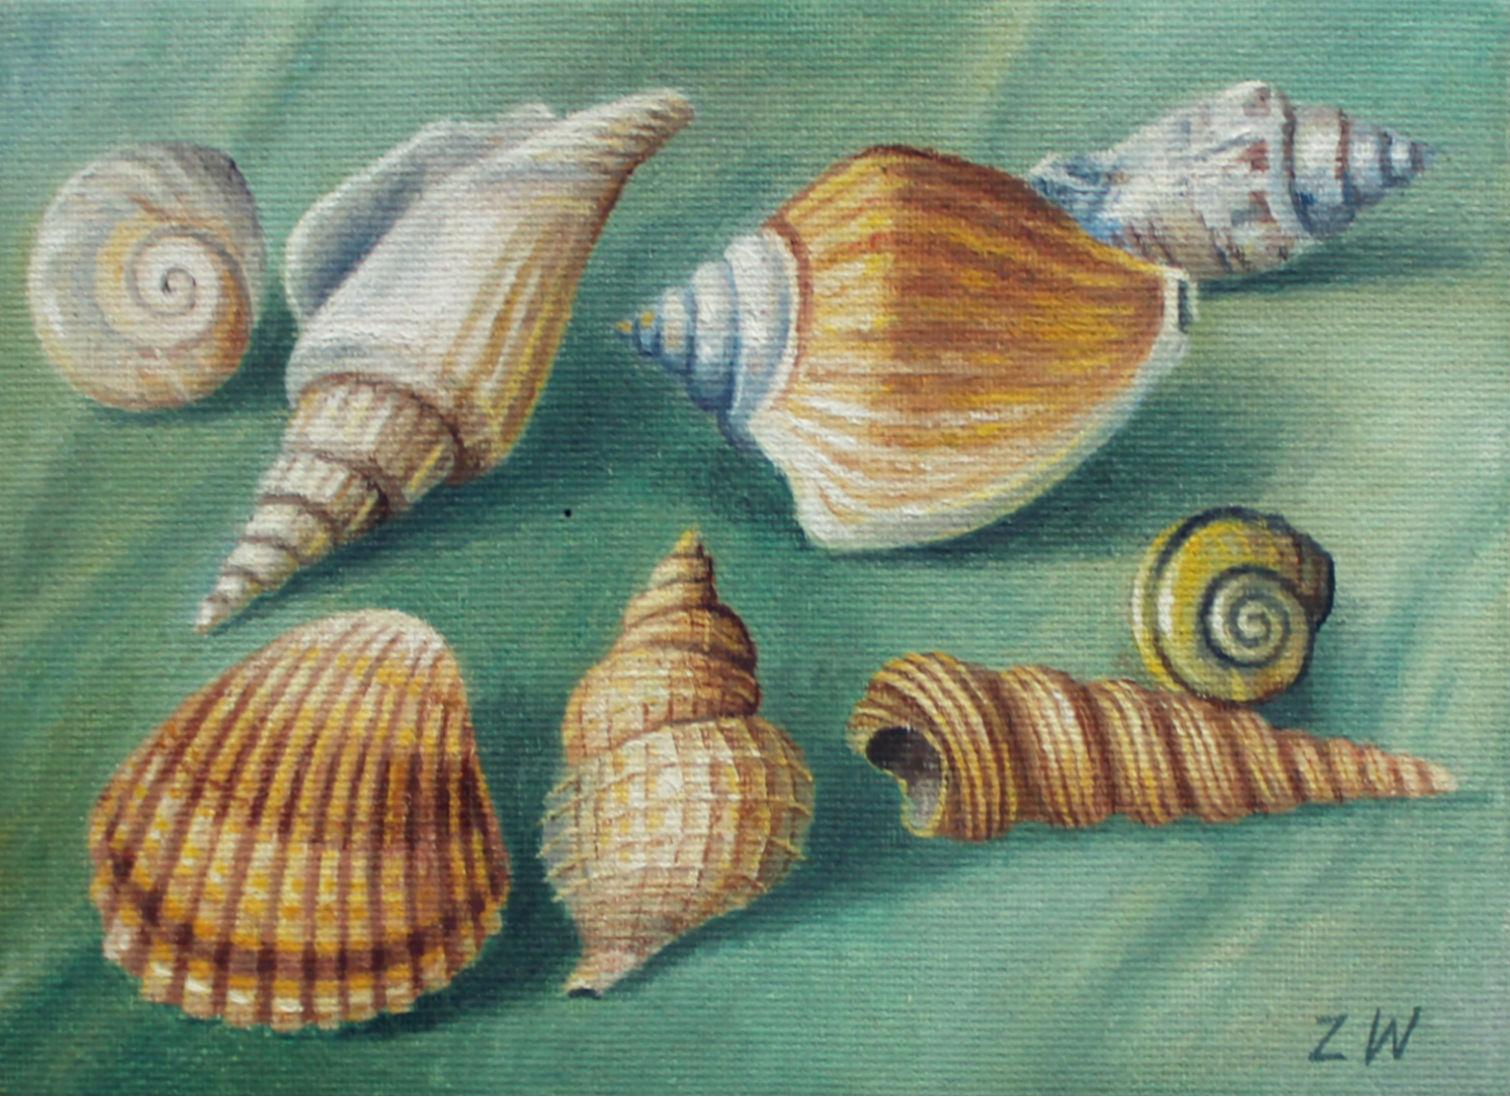 Zbigniew Wozniak Figurative Painting - Shells - Contemporary Figurative Oil Painting, Still life, Muted Colors, Realism